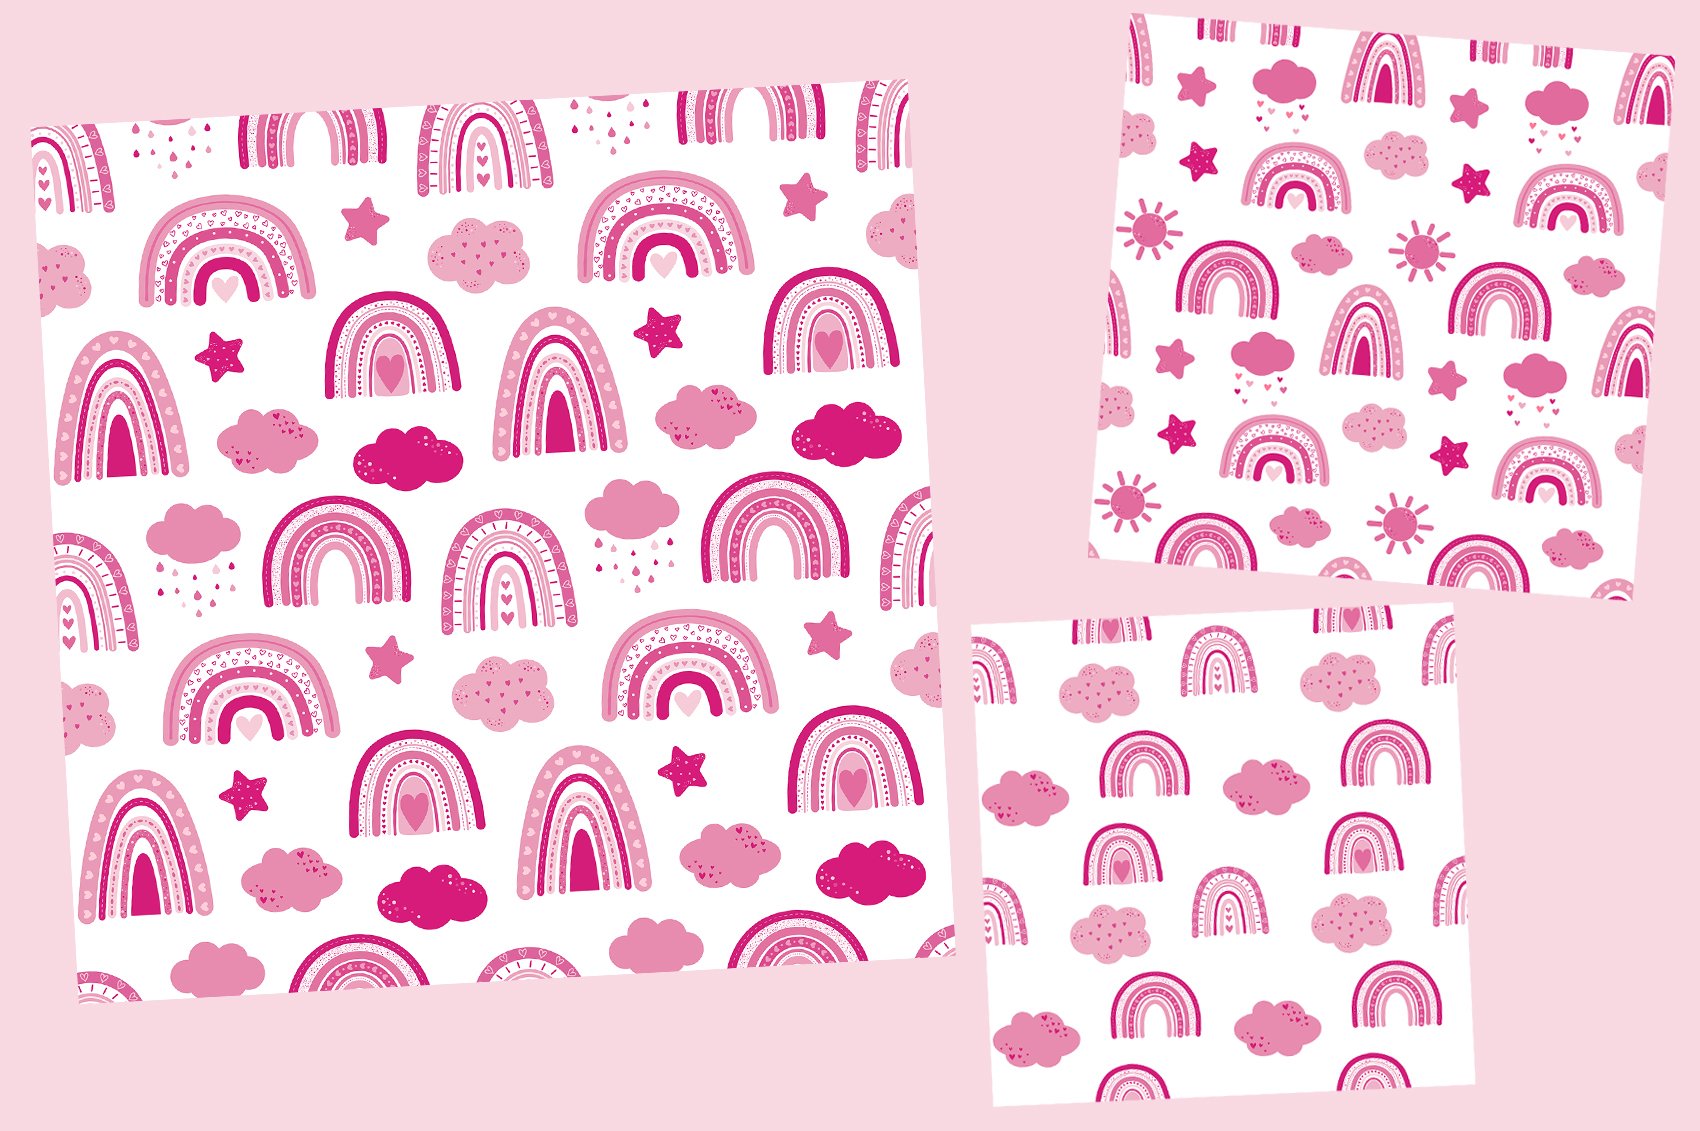 Rainbow Valentine's Day patterns preview image.